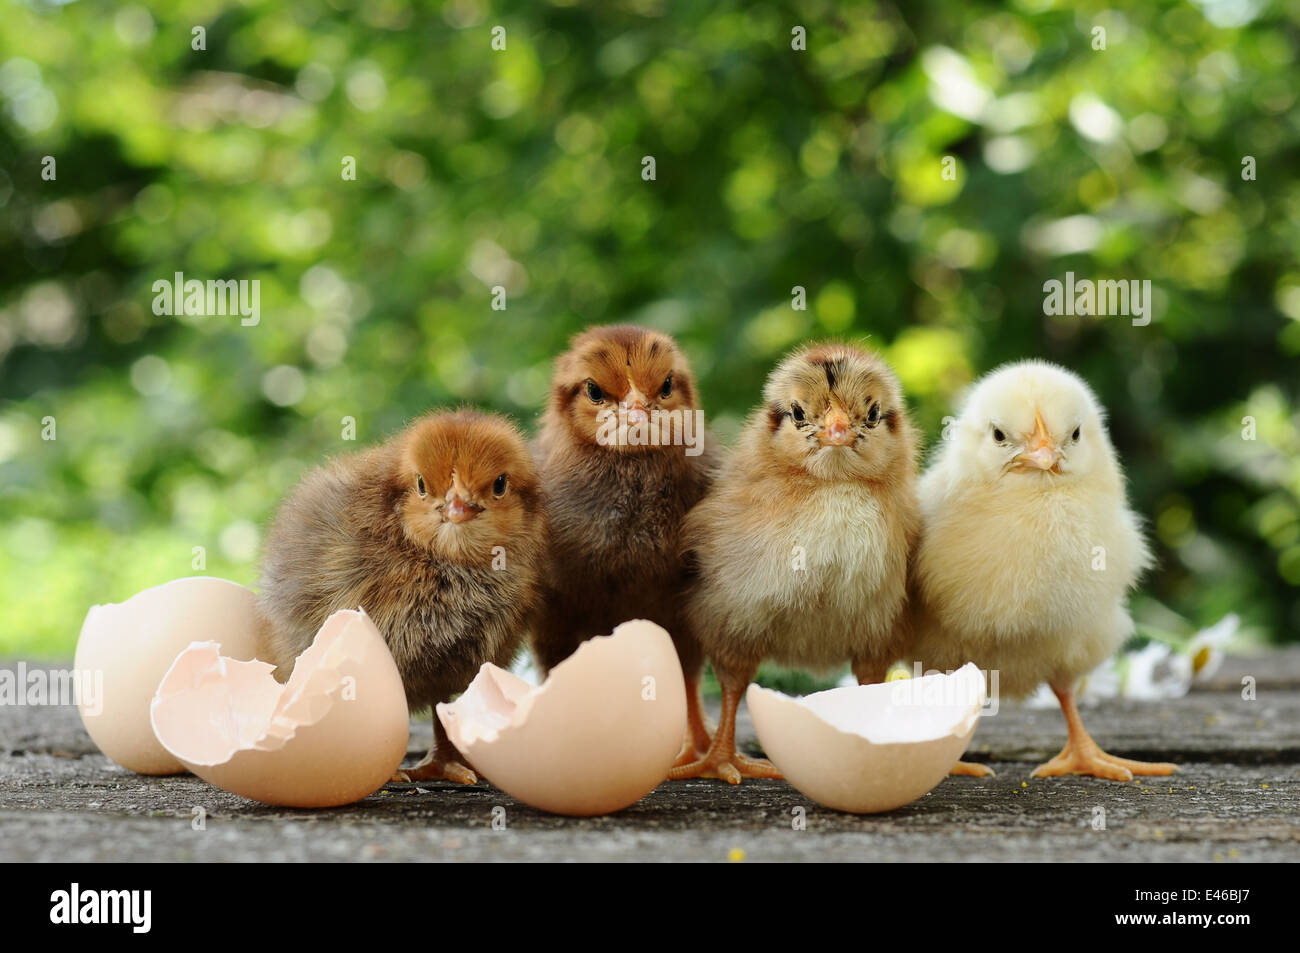 chicken newborn fluffy hatched shells egg empty summer nature birds animals day poultry eggs chicken funny group company flowers Stock Photo